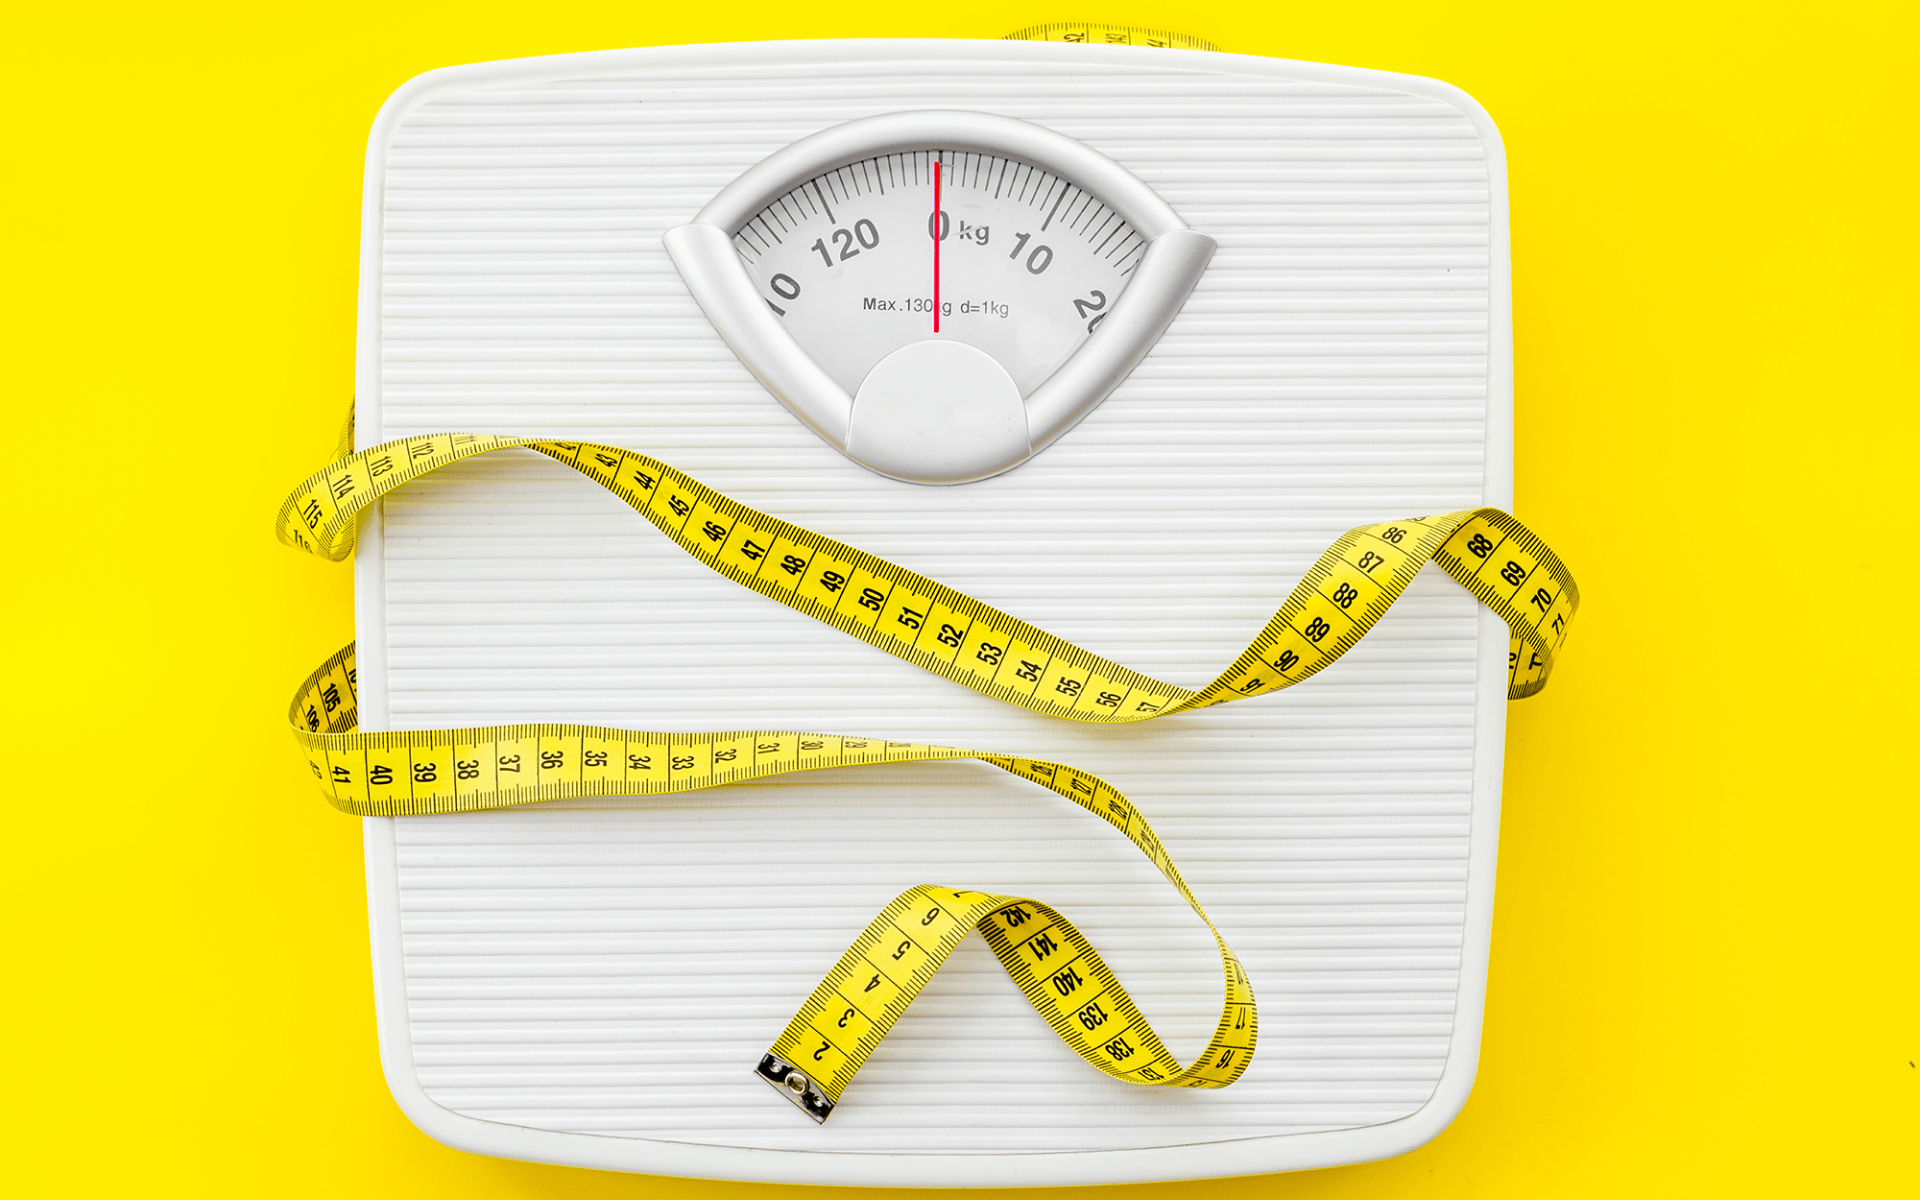 Weight scale and tape measure on yellow background.